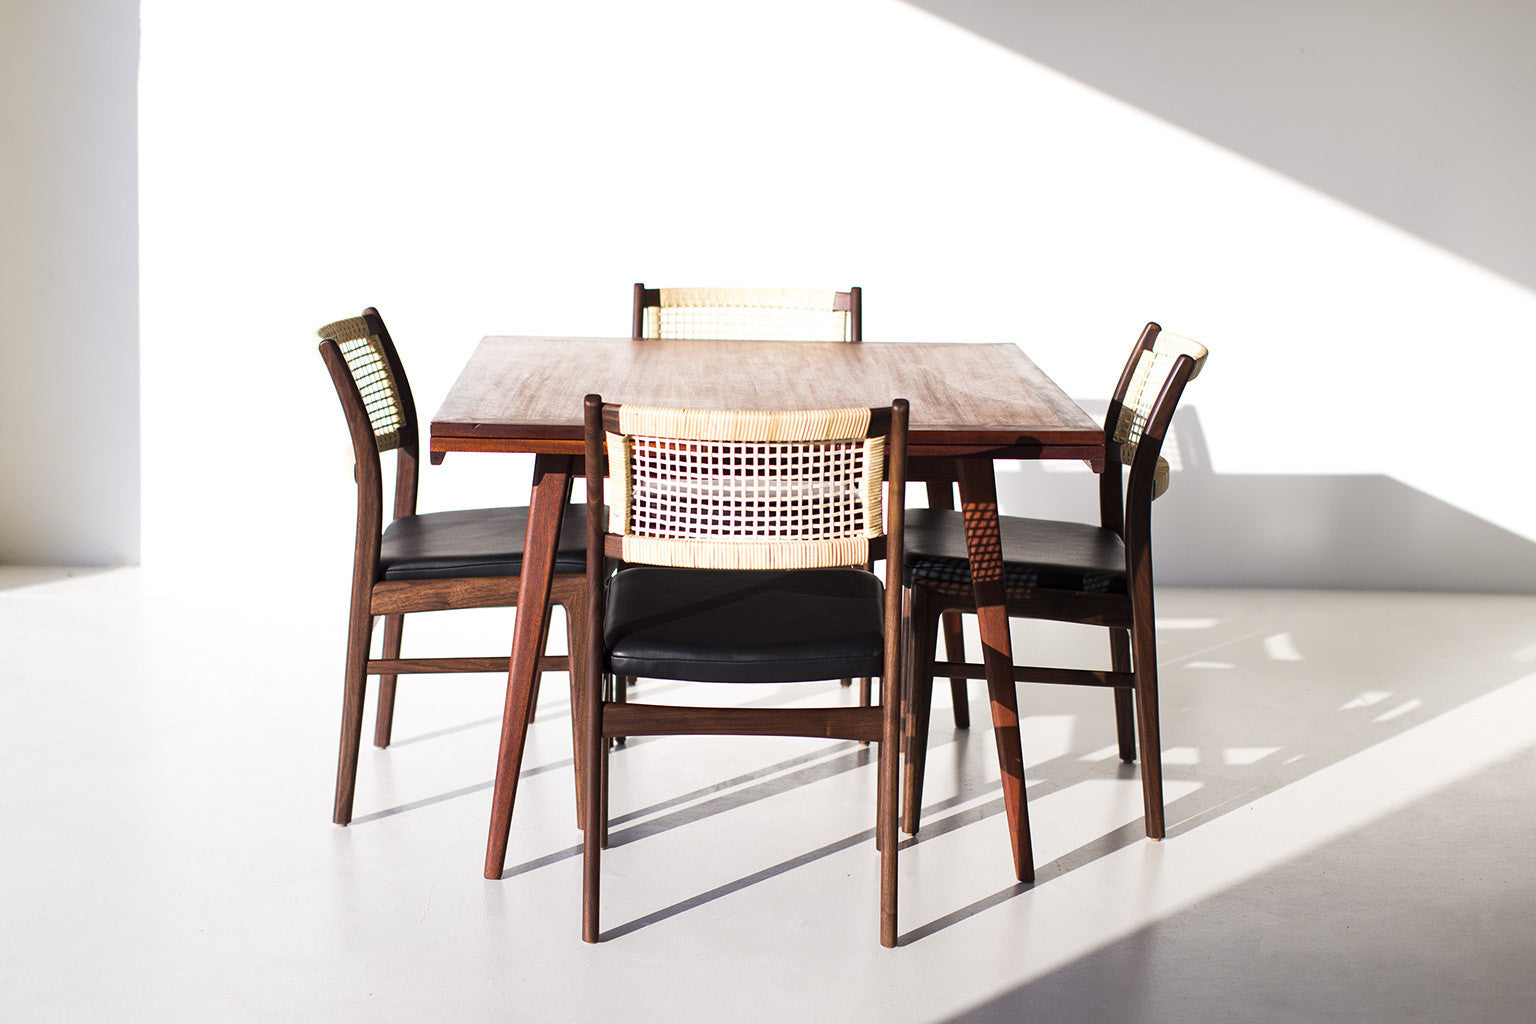 sylve-stenquist-dining-chairs-tribute-furniture-T-1002-08